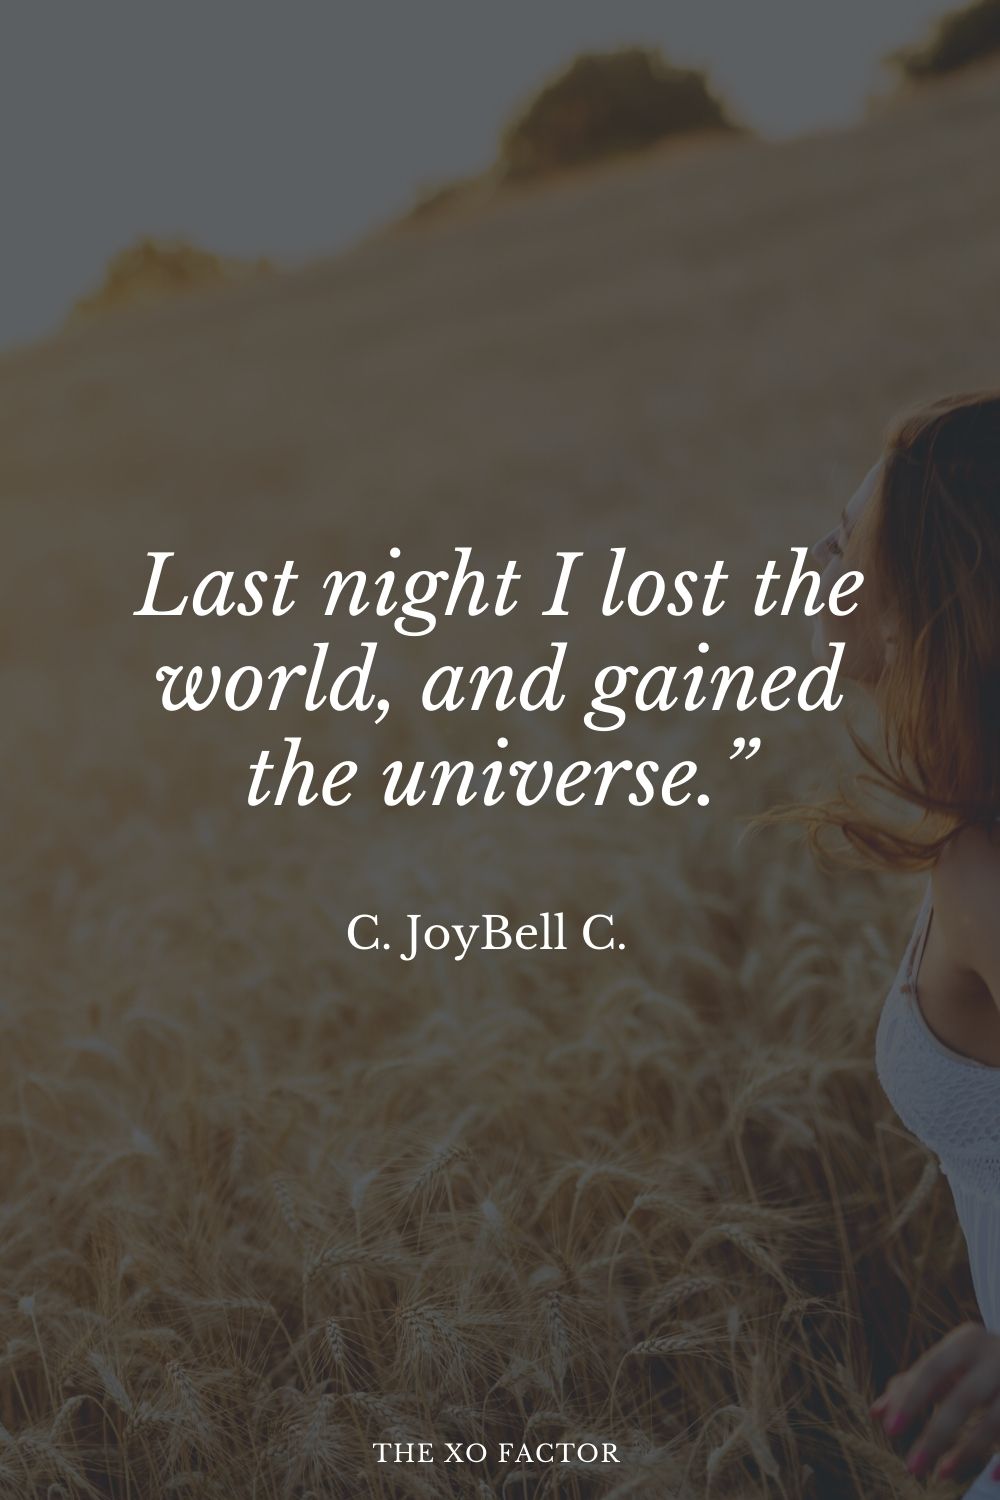 Last night I lost the world, and gained the universe.” C. JoyBell C.